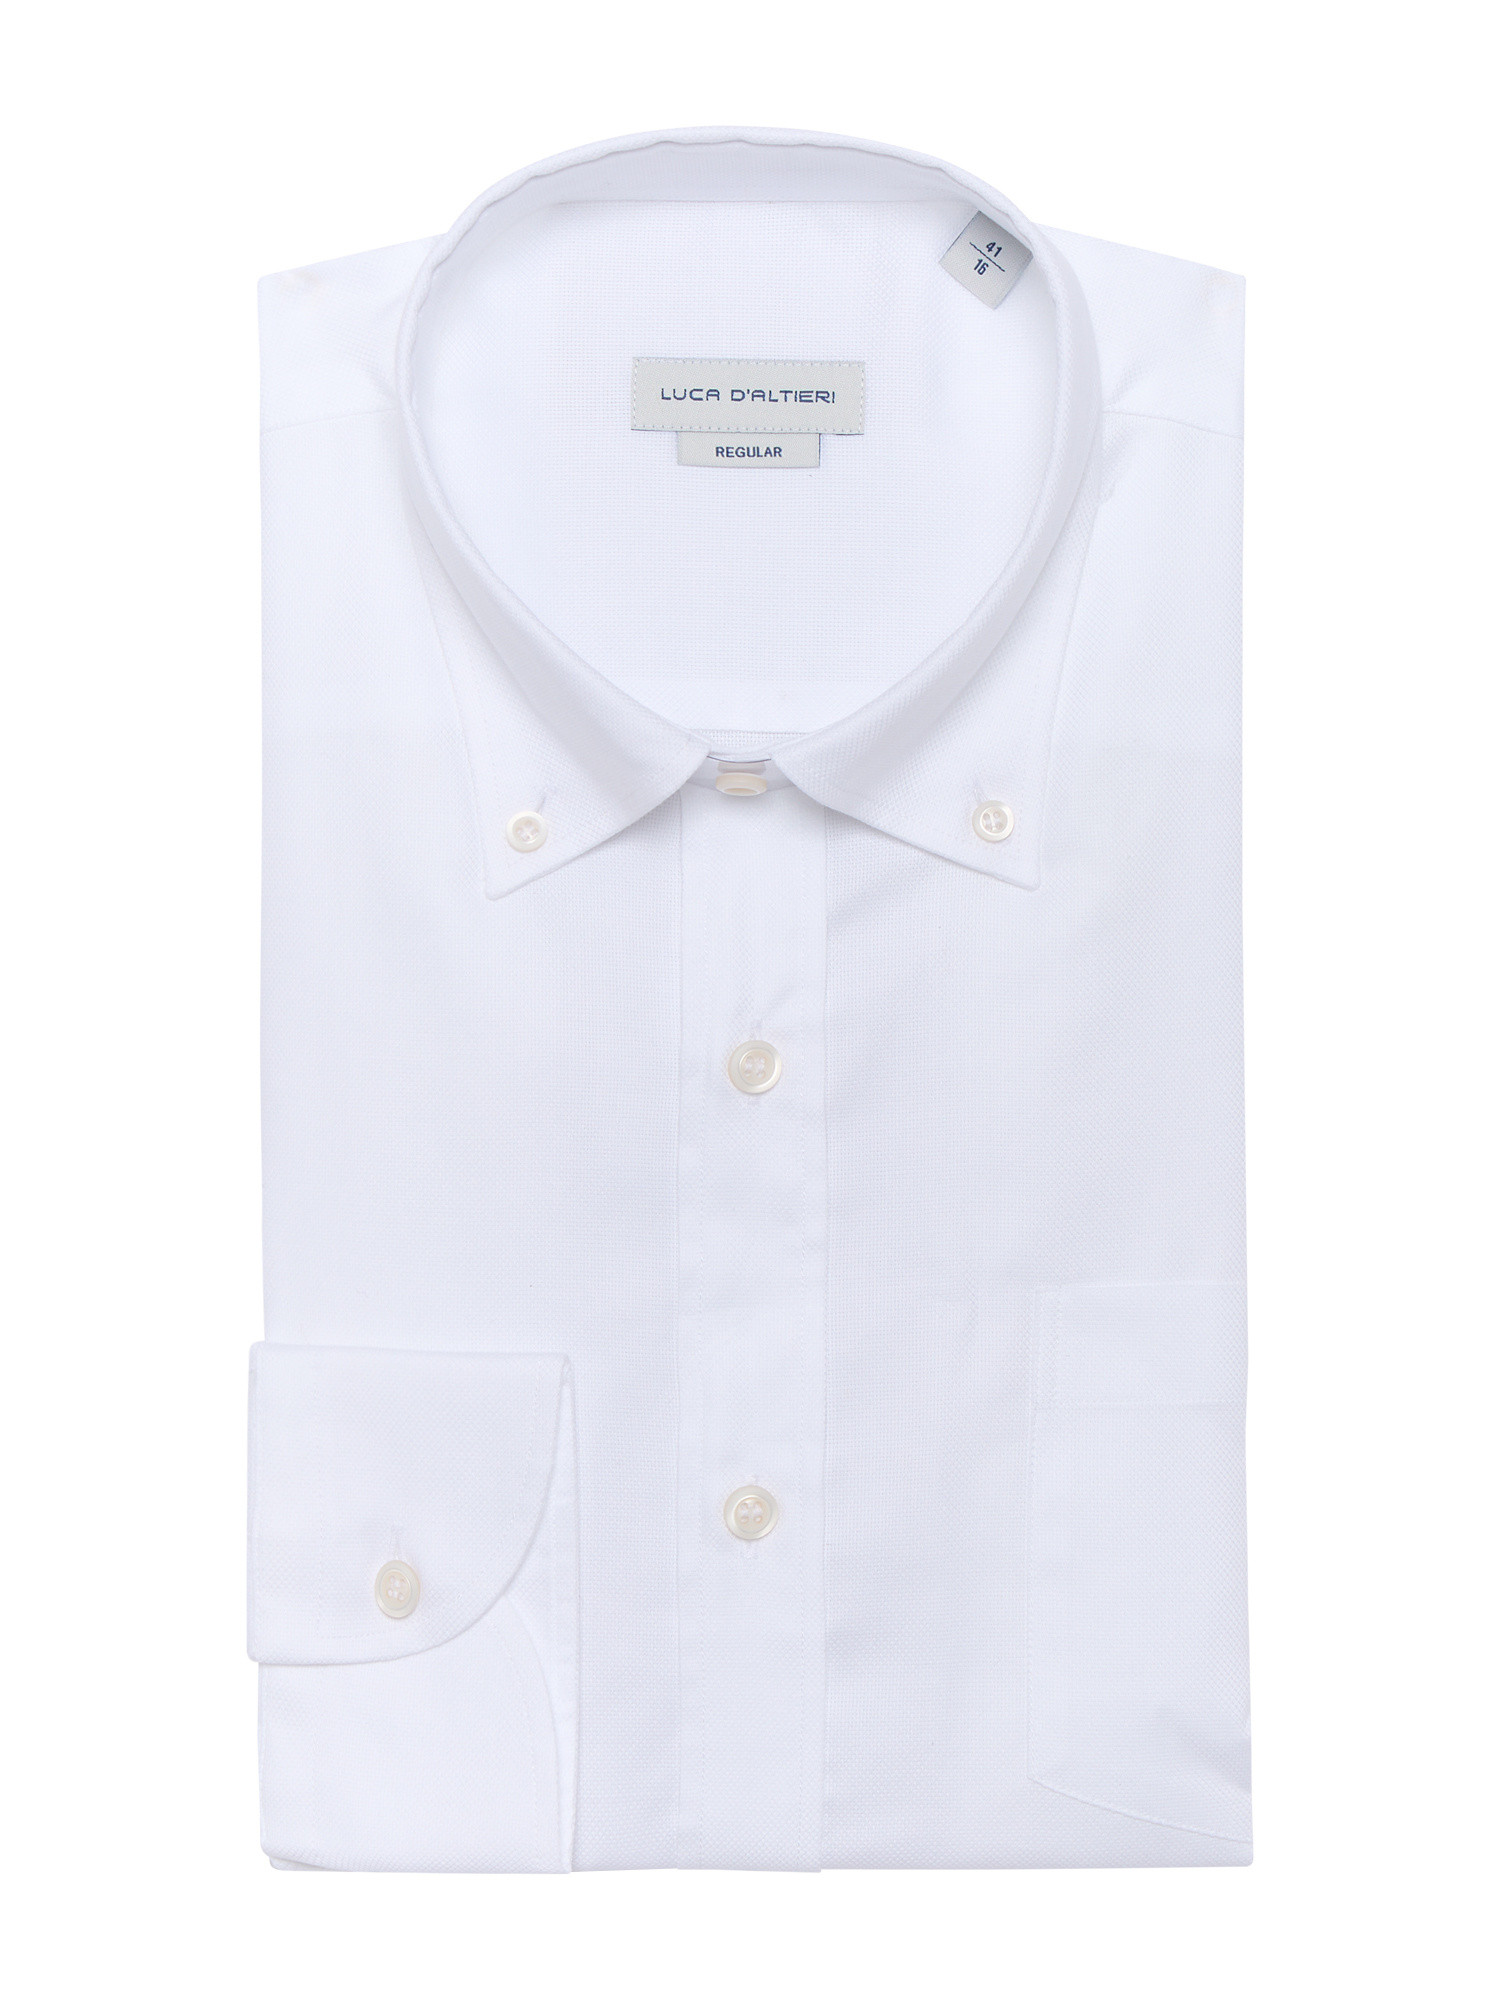 Luca D'Altieri - Regular fit chasuble shirt in pure textured cotton, White, large image number 0